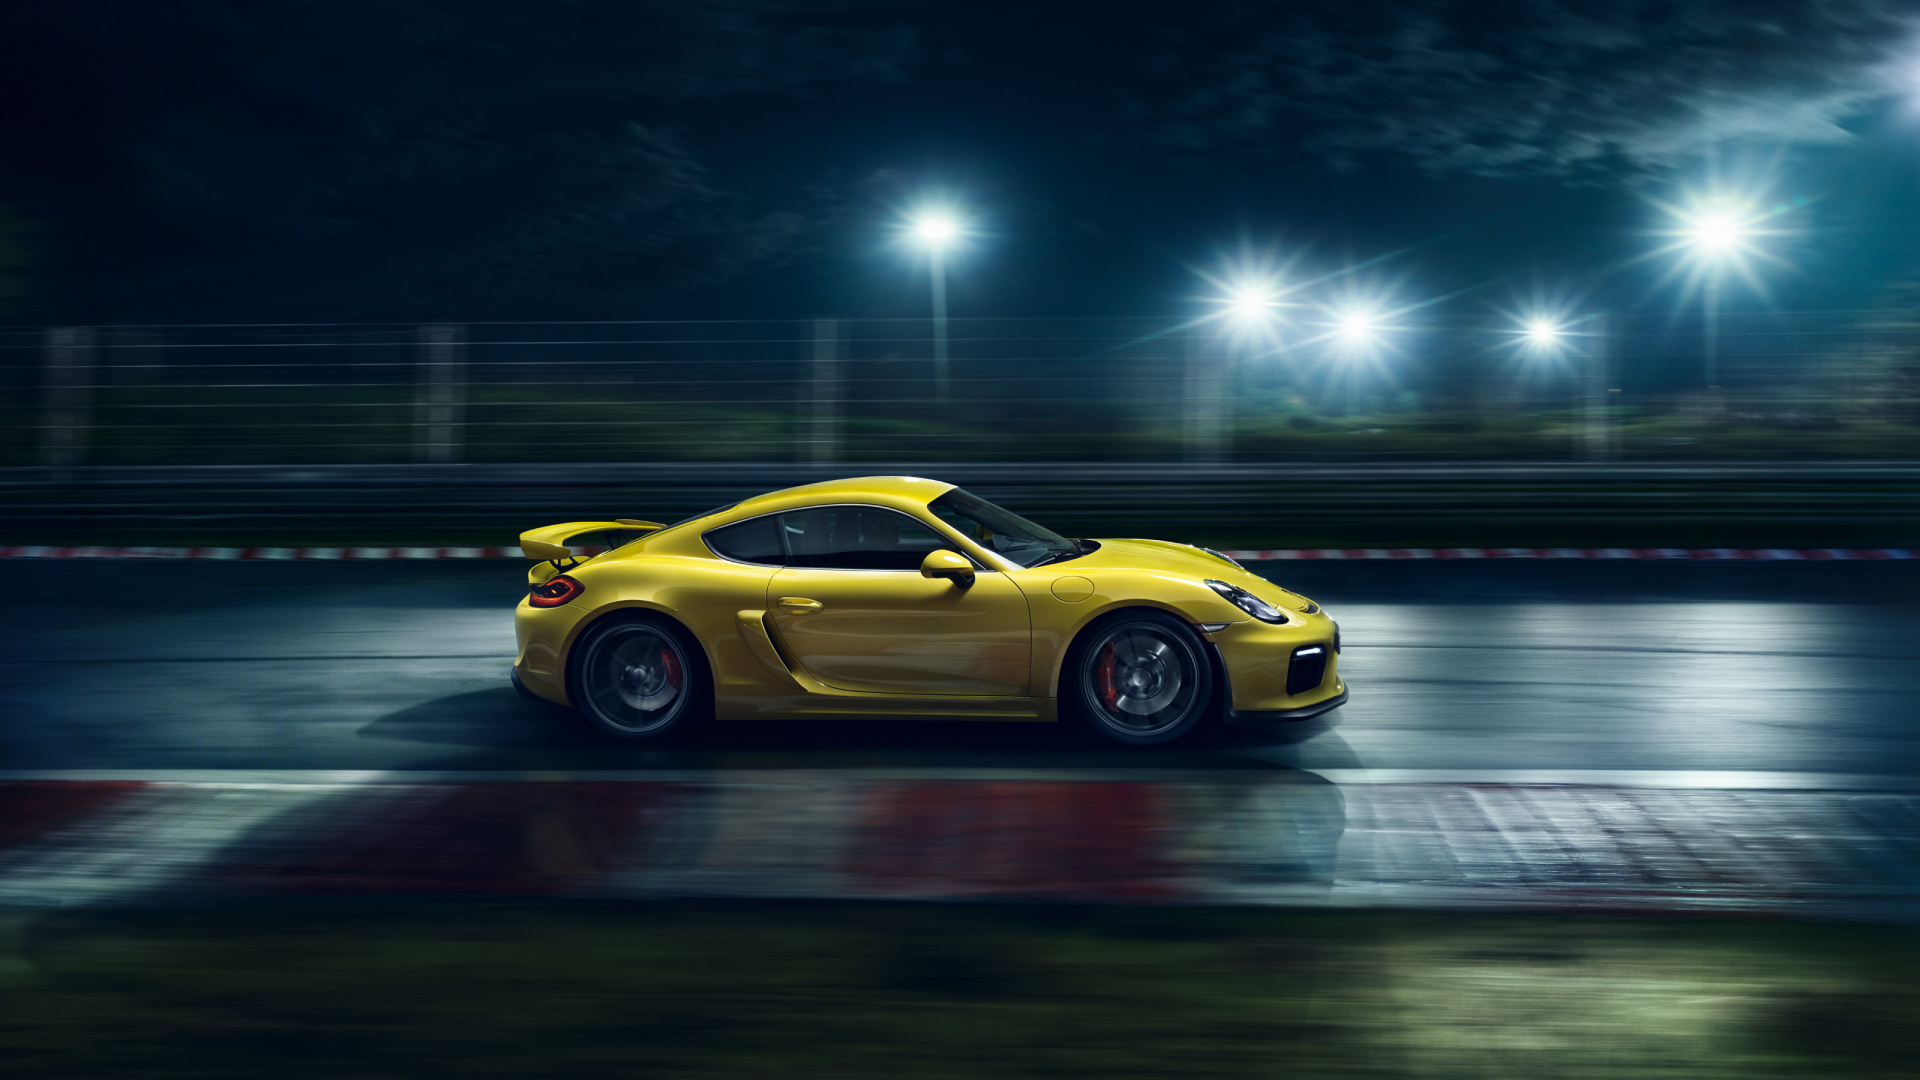 Yellow Porsche 911 on Road at Night. Wallpaper in 1920x1080 Resolution